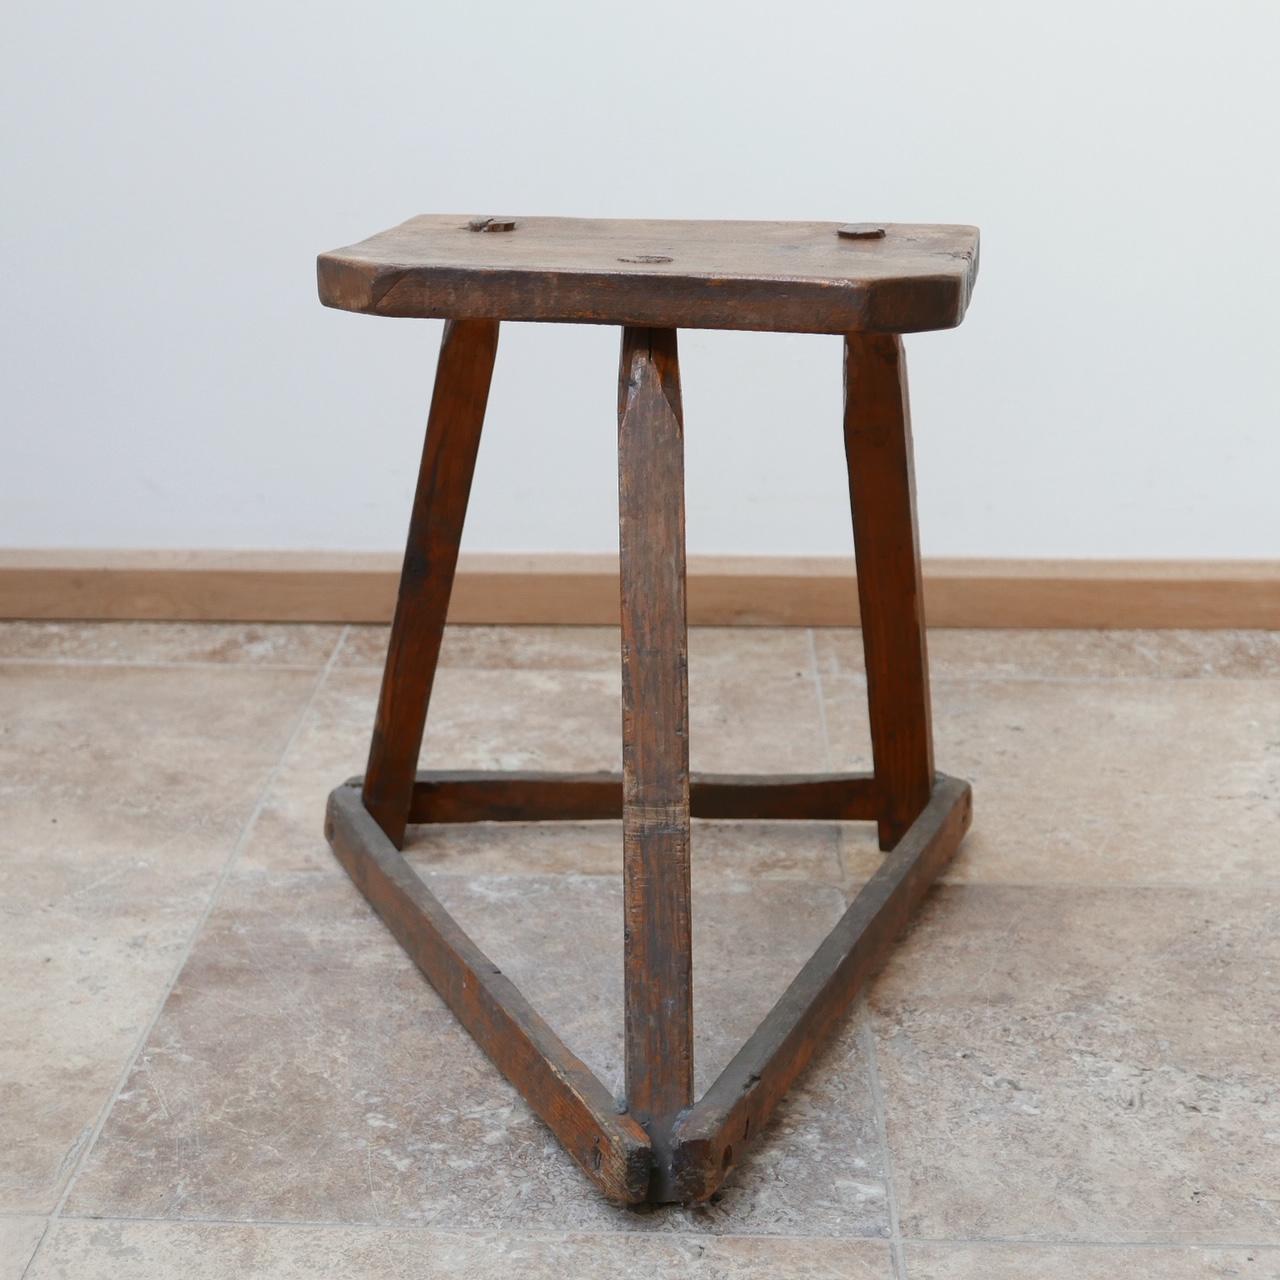 19th Century Antique English Wooden Cutler's Stool or Side Table 'No.1'